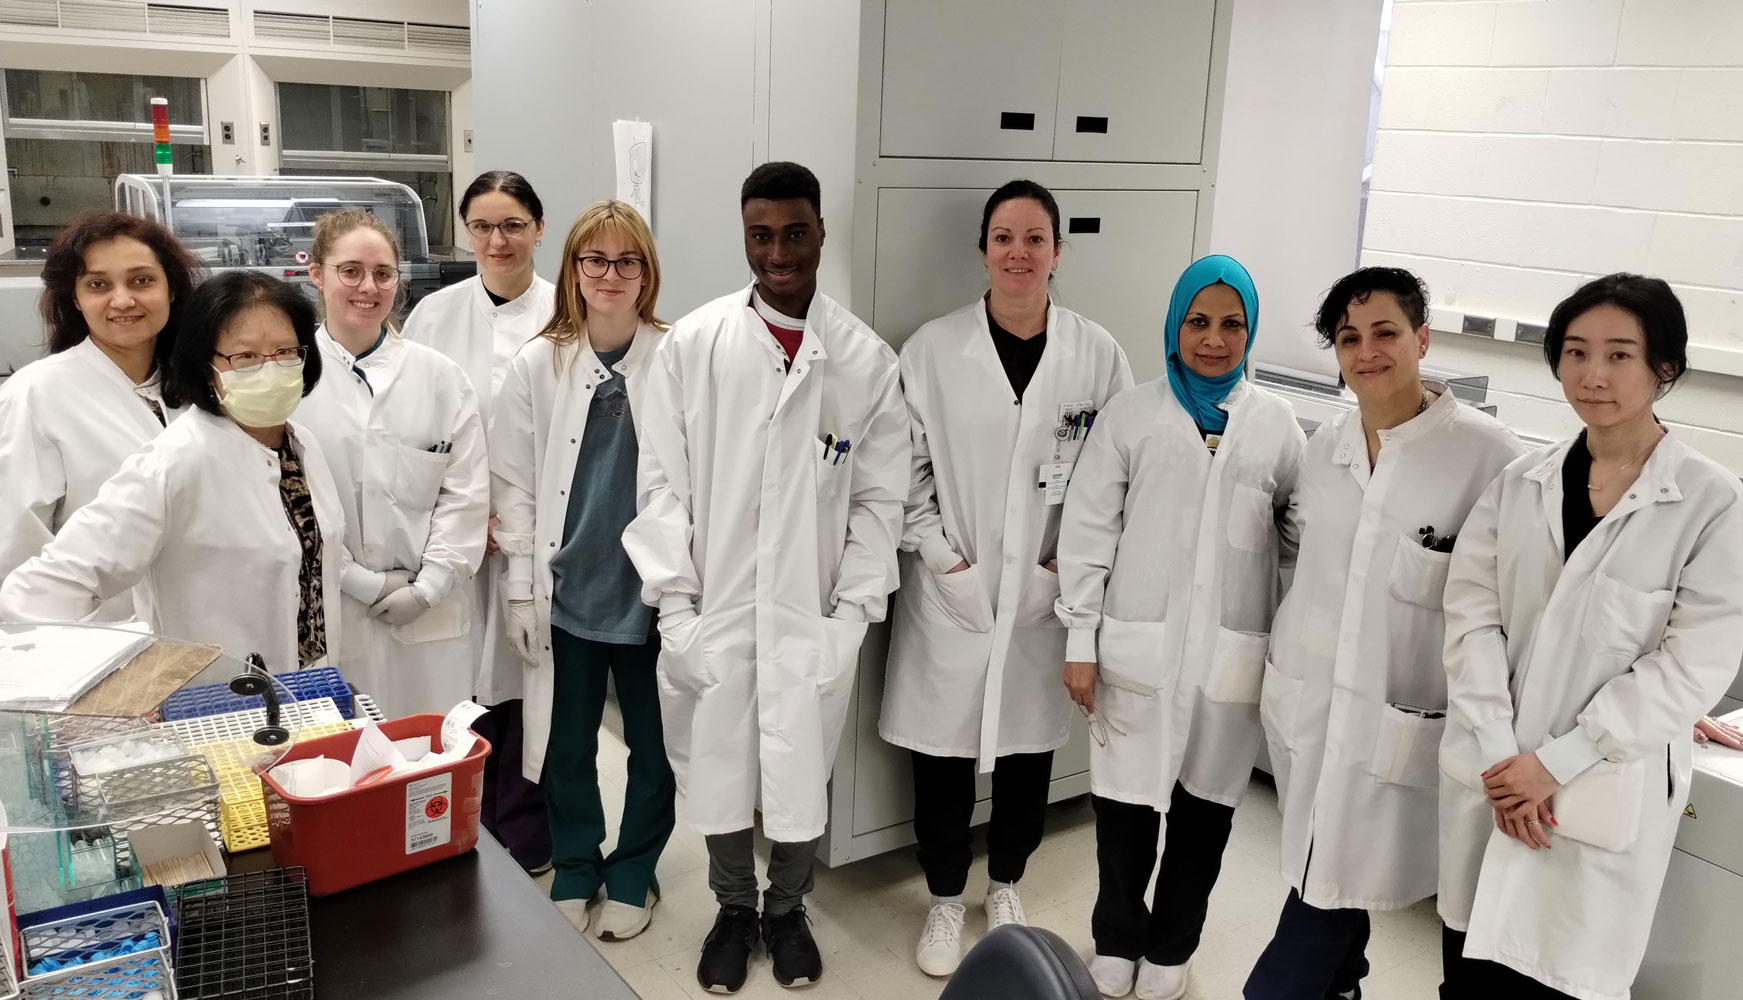 group portrait of lab employees in lab coats